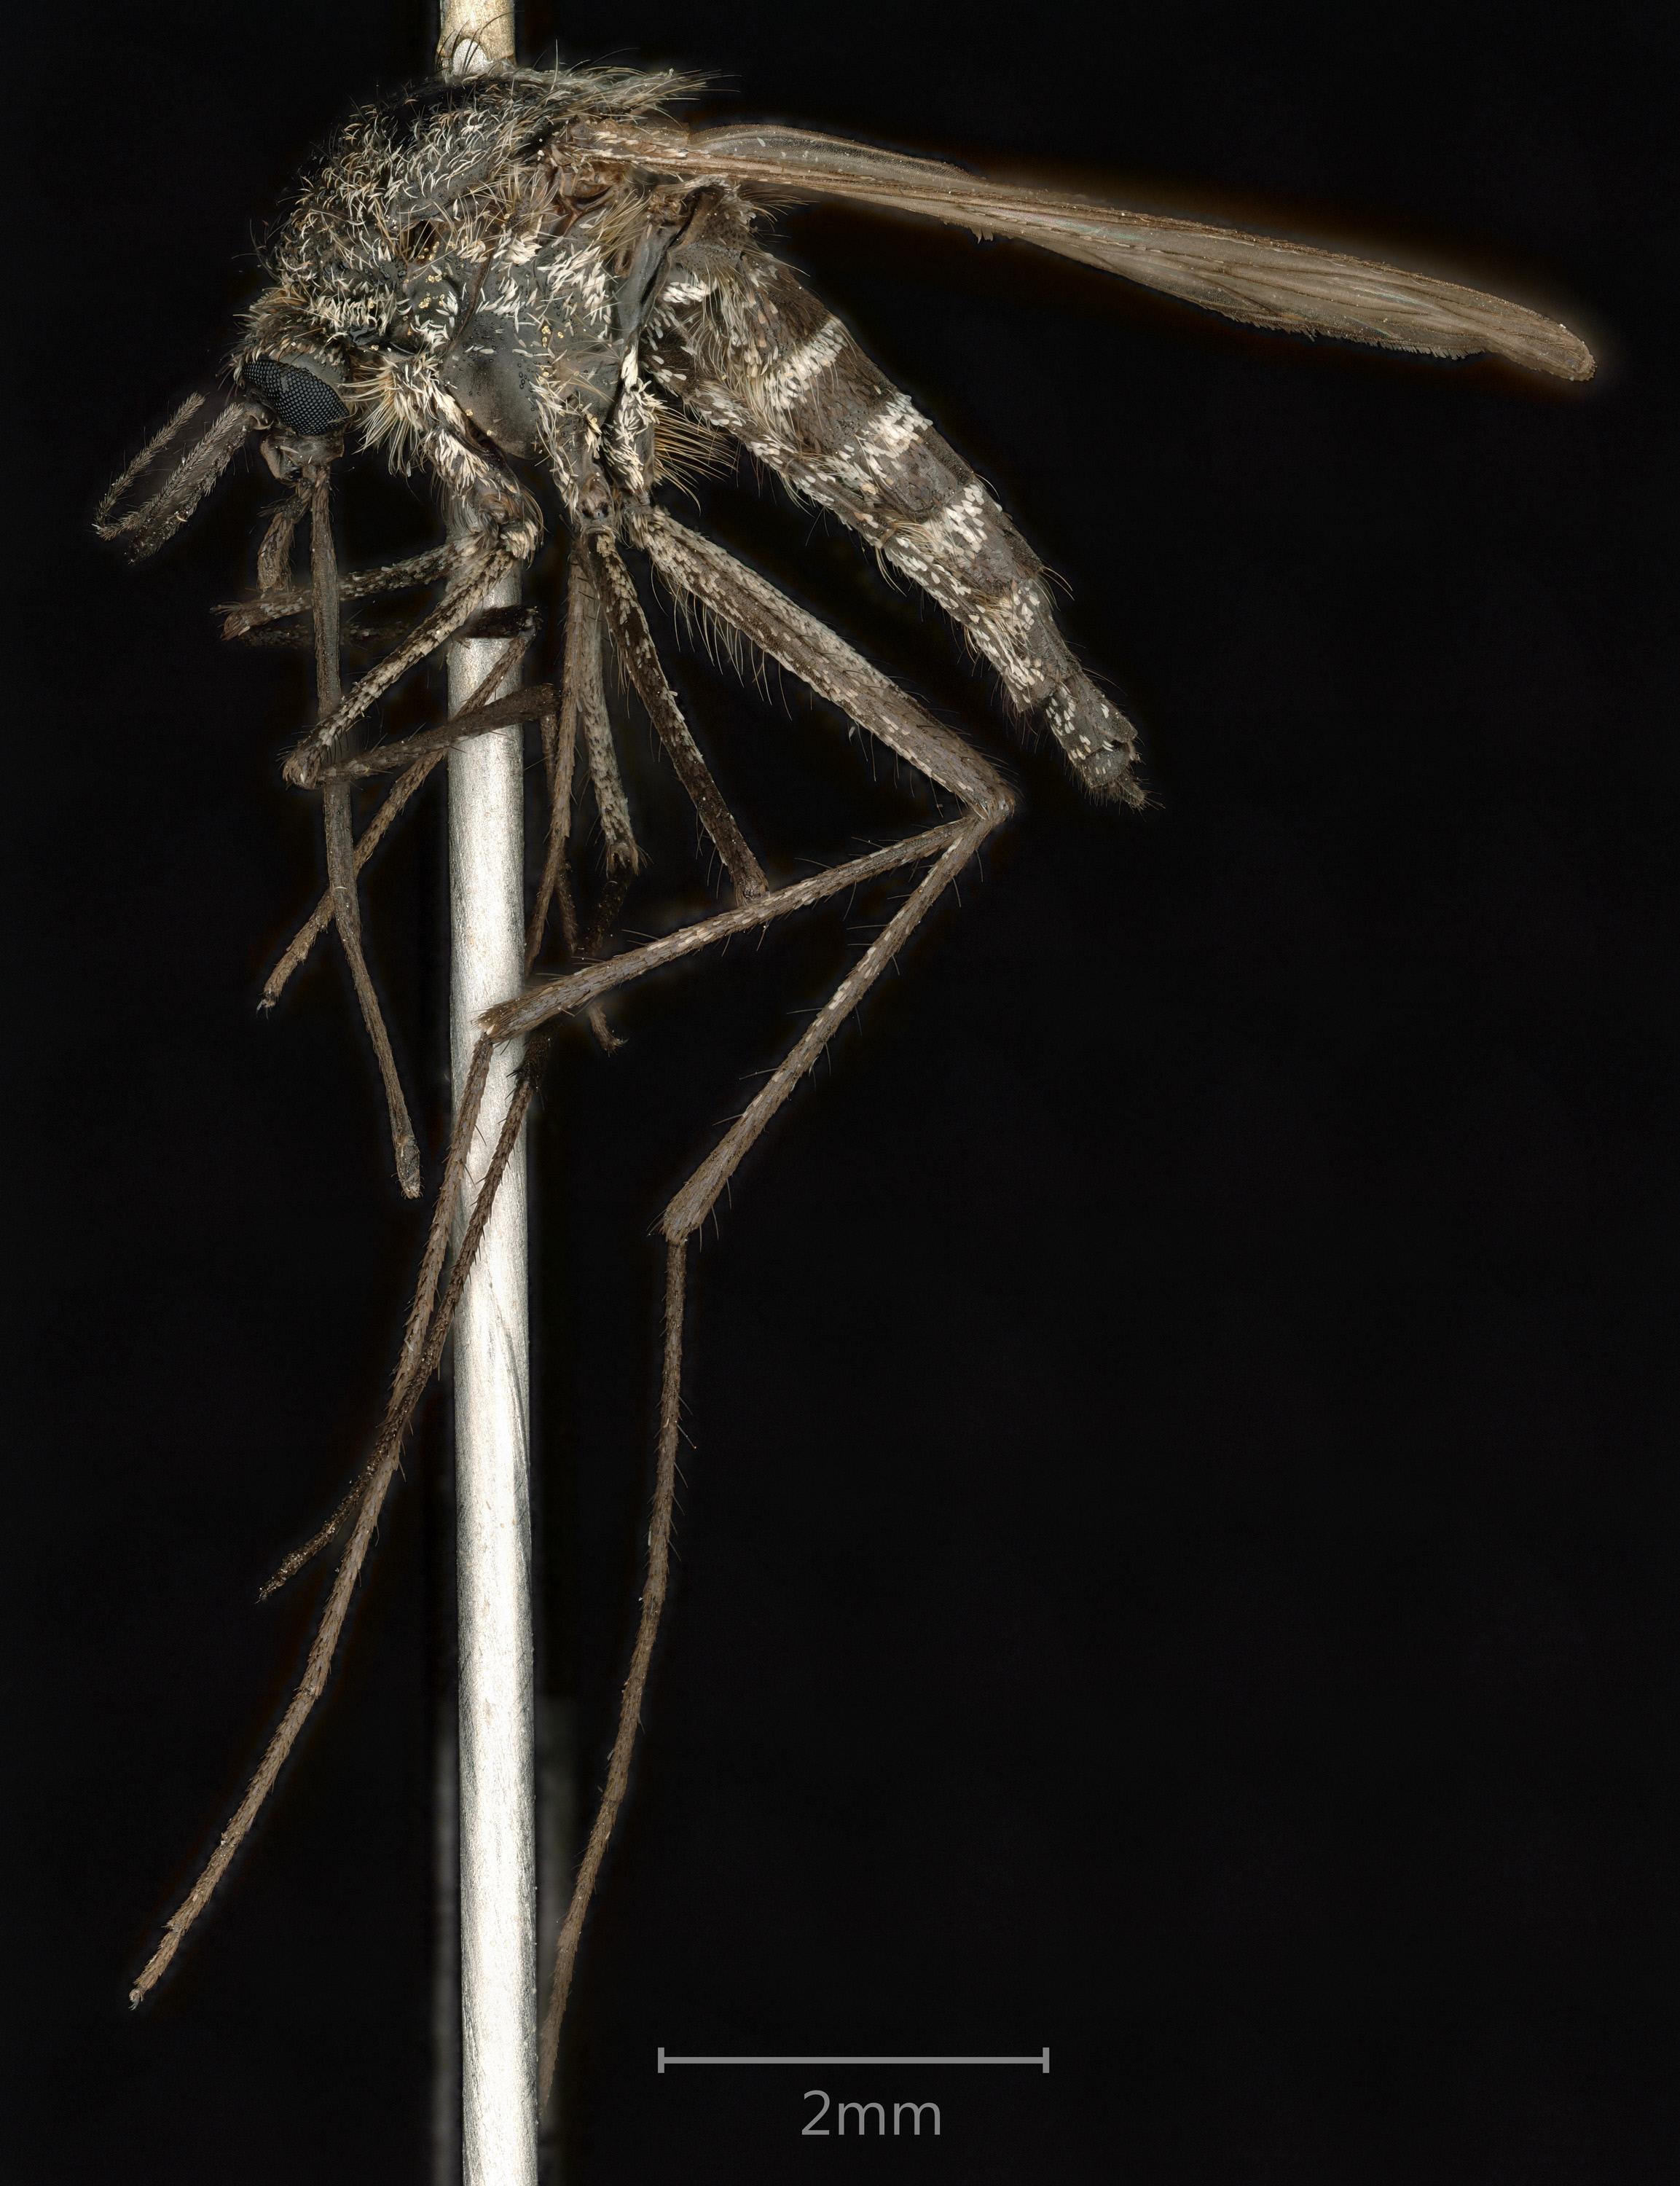 A pinned mosquito against a dark background. 